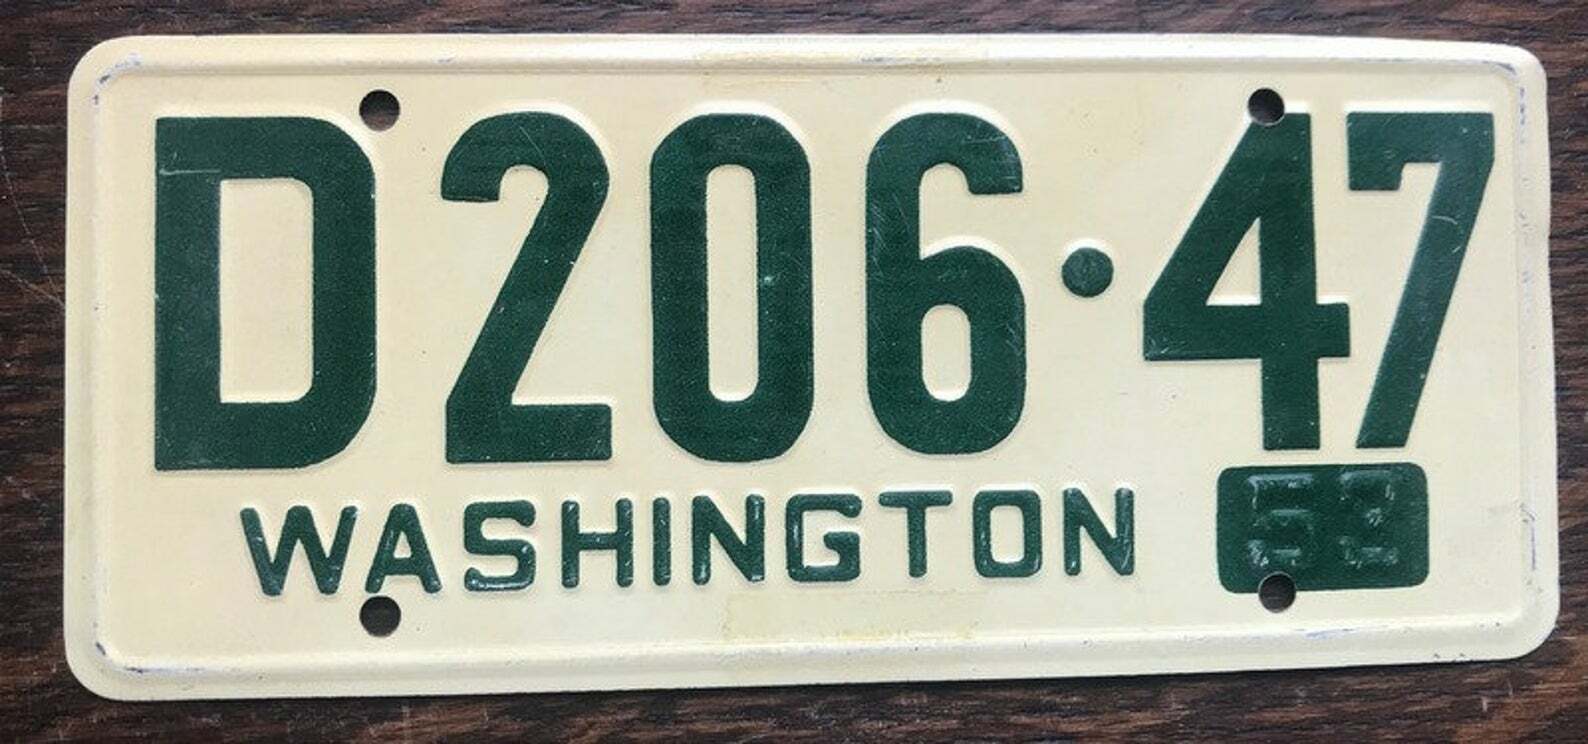 1953 Wheaties Post Cereal Premium Prize Bicycle License Plate - Washington